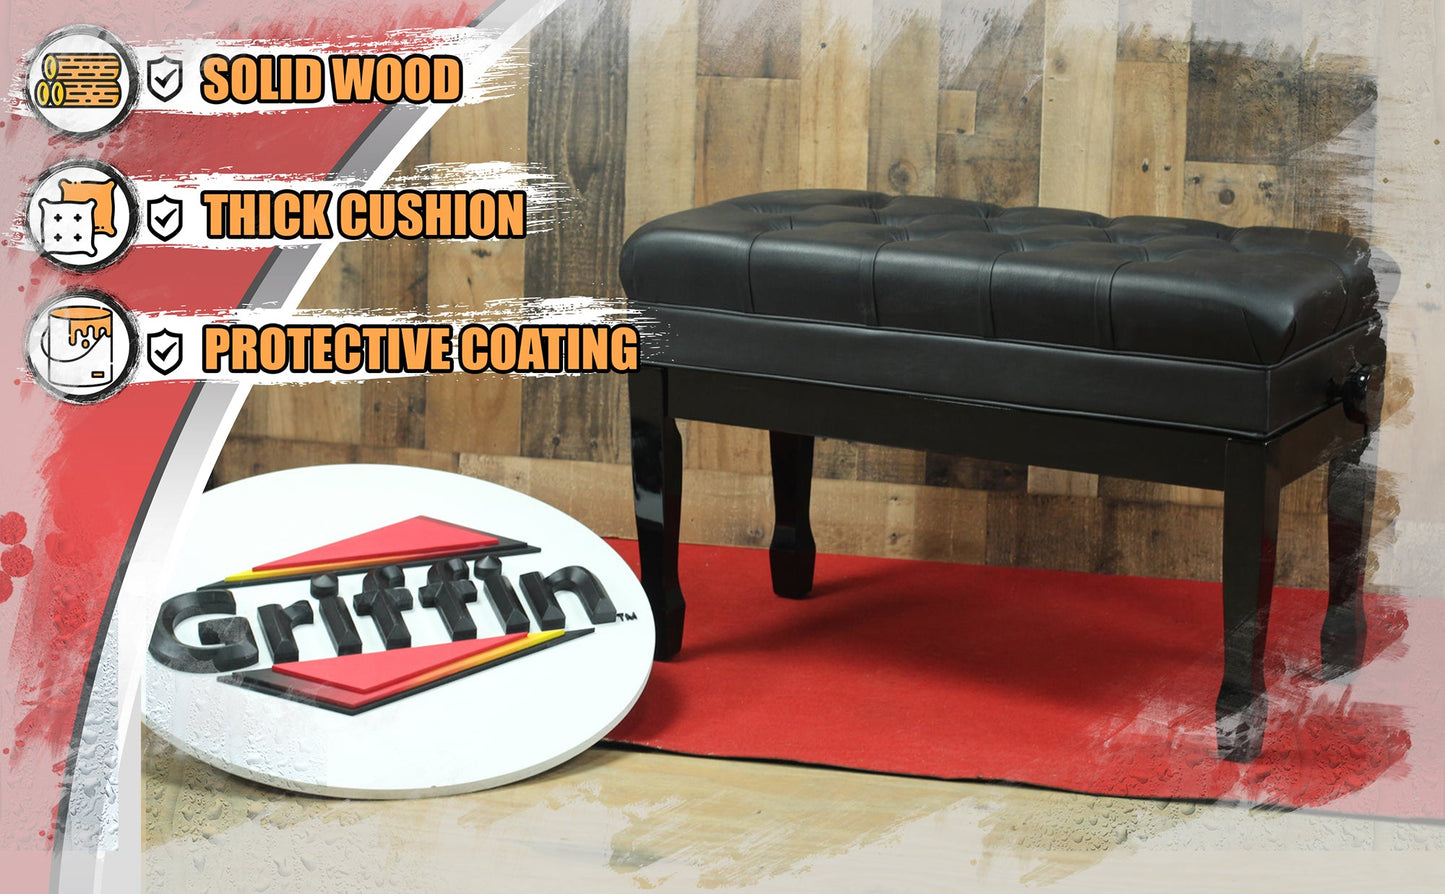 GRIFFIN Genuine Leather Piano Bench - Oversize Keyboard Duet Stool - Black Solid Wood & Music Seat